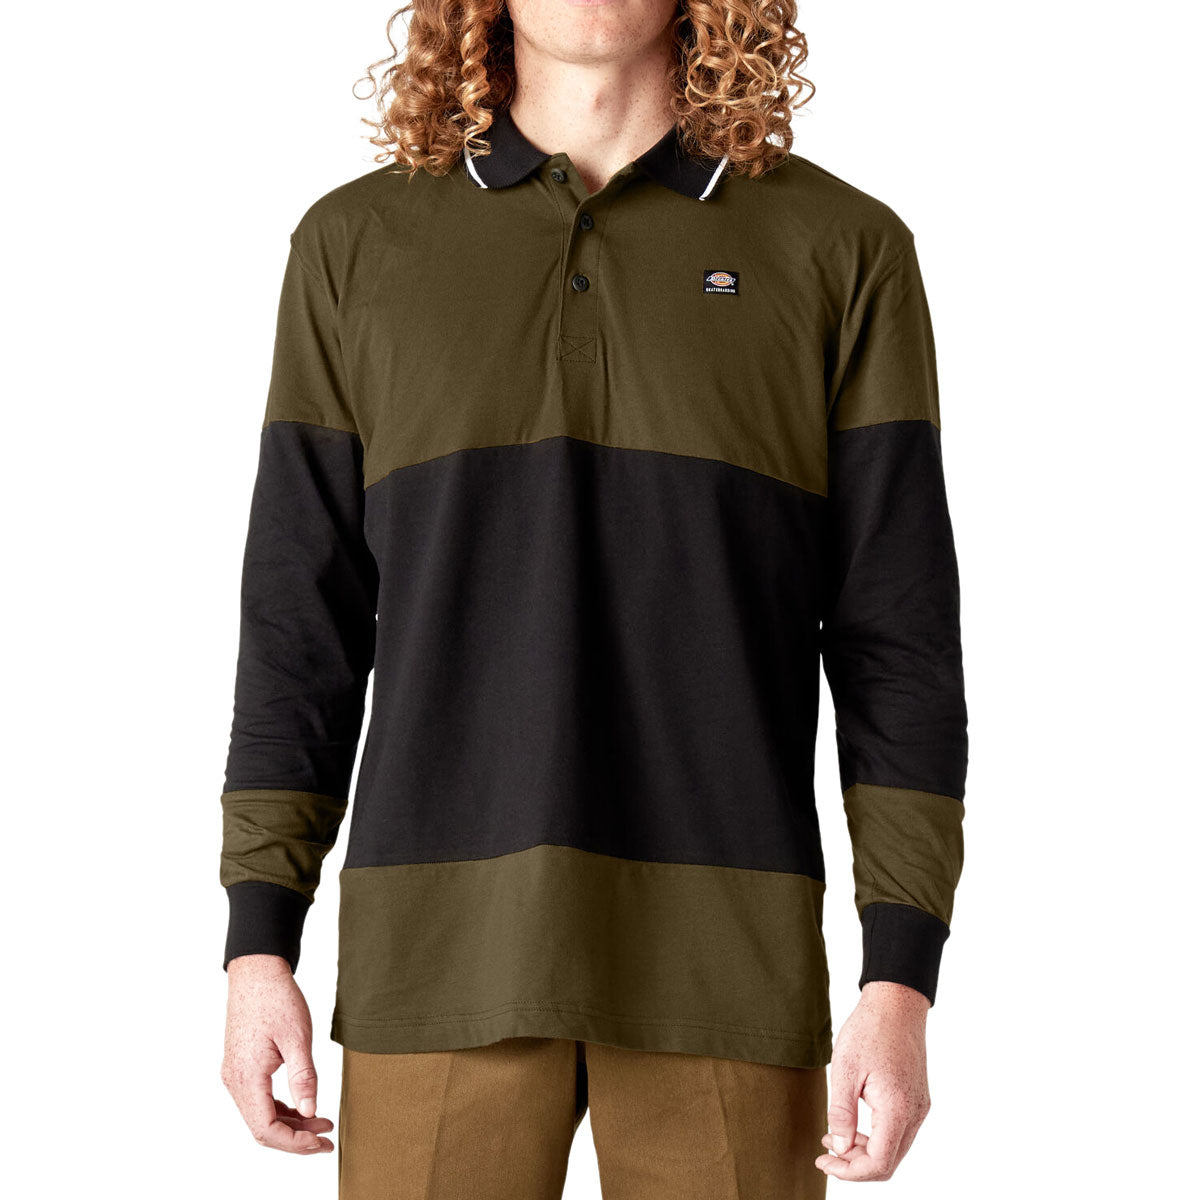 Dickies Rugby Long Sleeve Polo Shirt - Dark Olive image 1